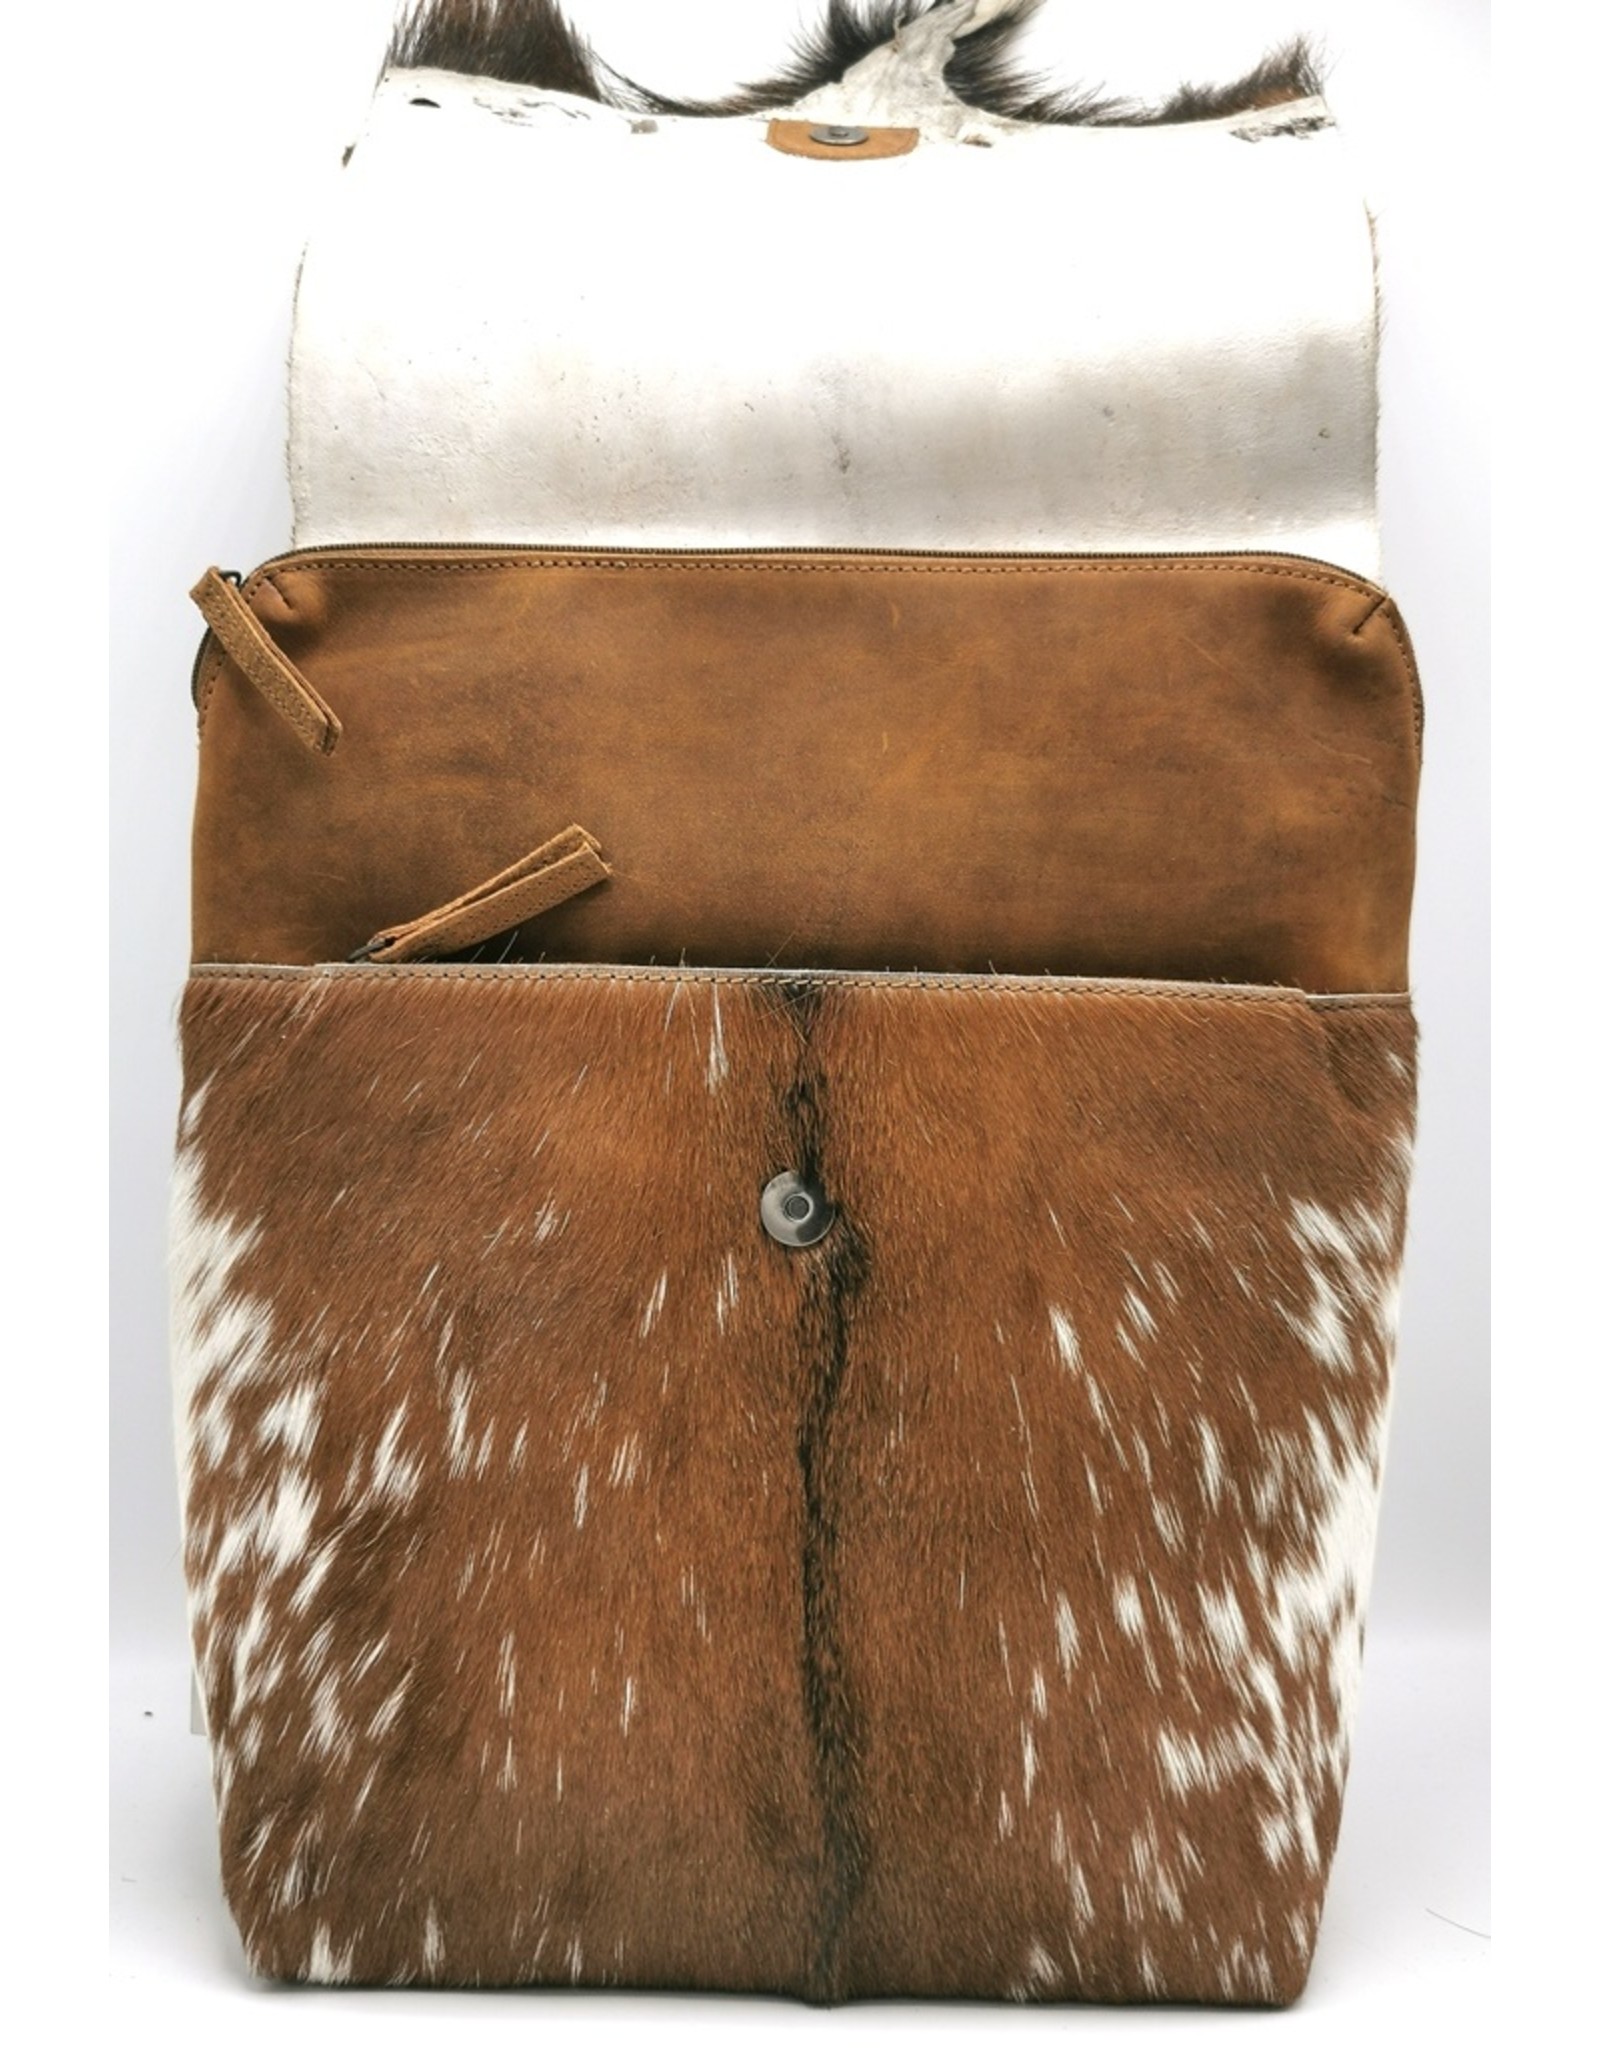 Hide & Stitches Leather backpacks  and leather shoppers - Hide & Stitches Leather Backpack with Fur Cover Brown - 1